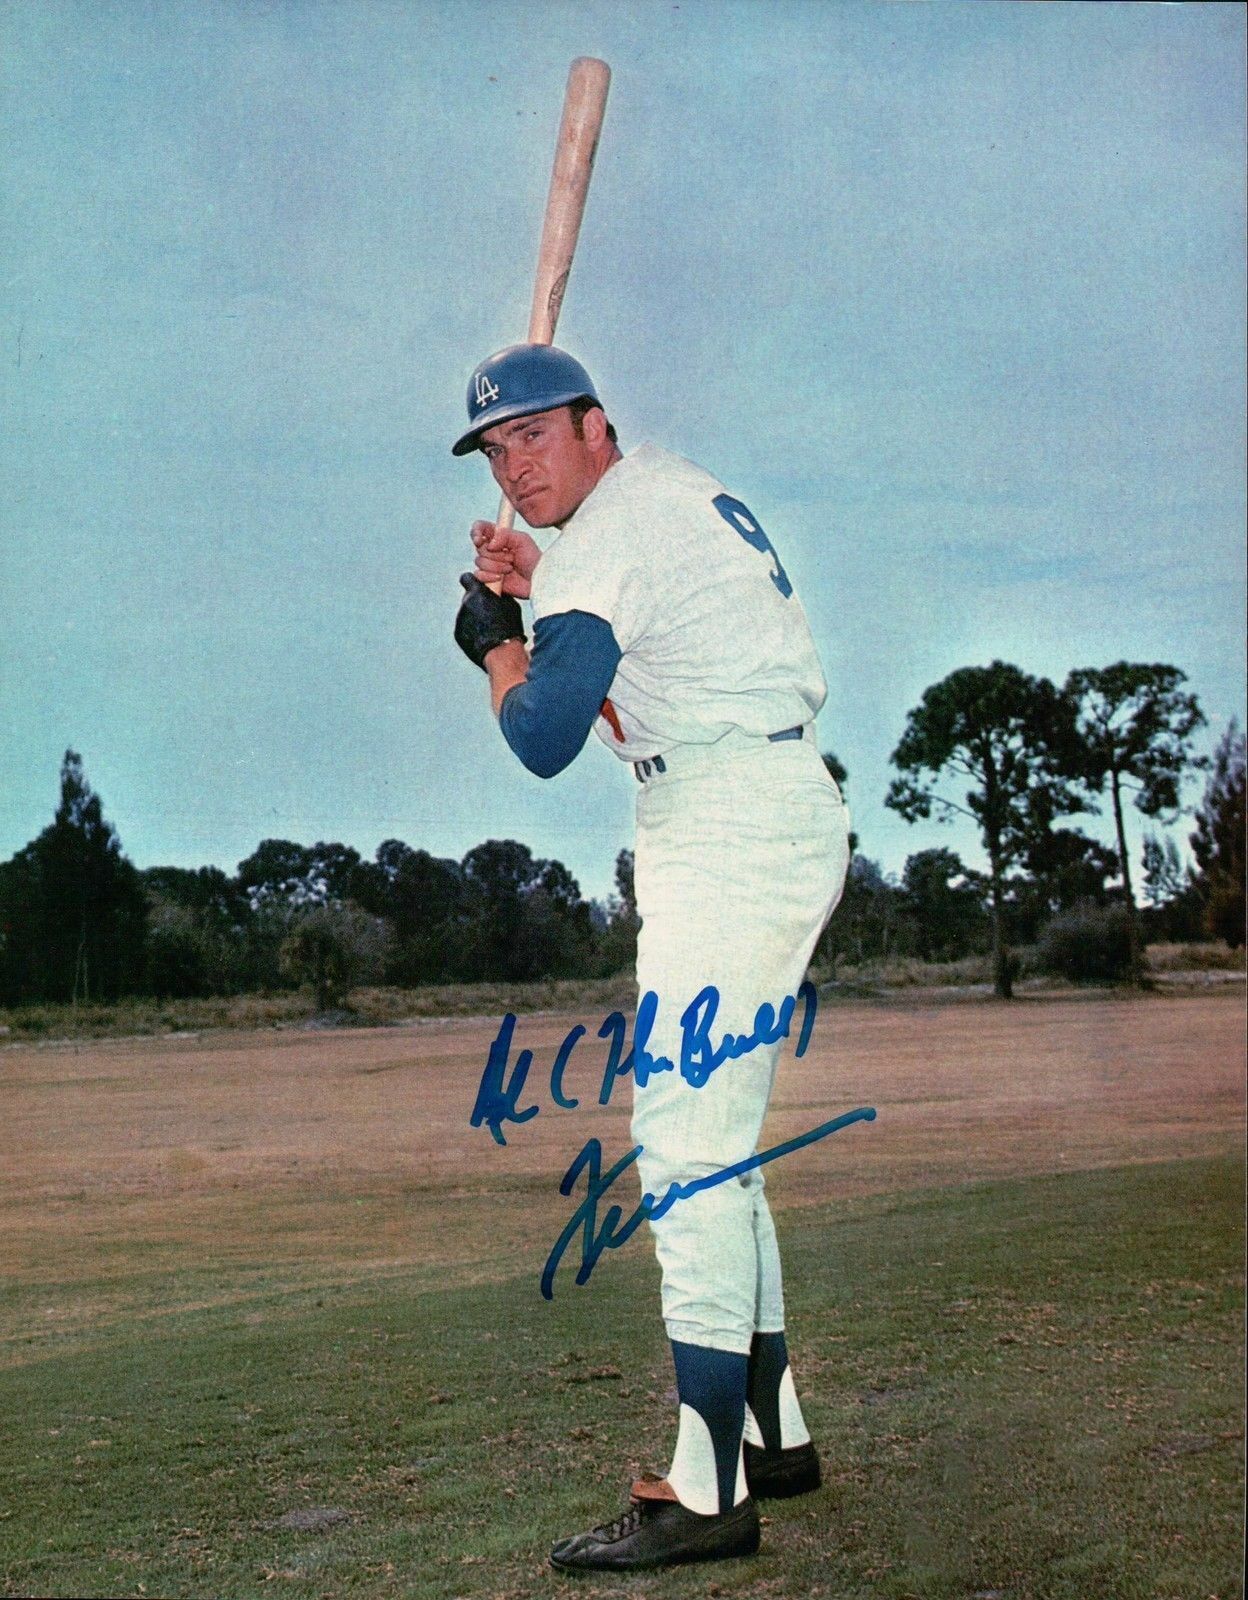 Al (The Bull) Ferrara Signed 8X10 Photo Poster painting Autograph Dodgers Field Two Line Center